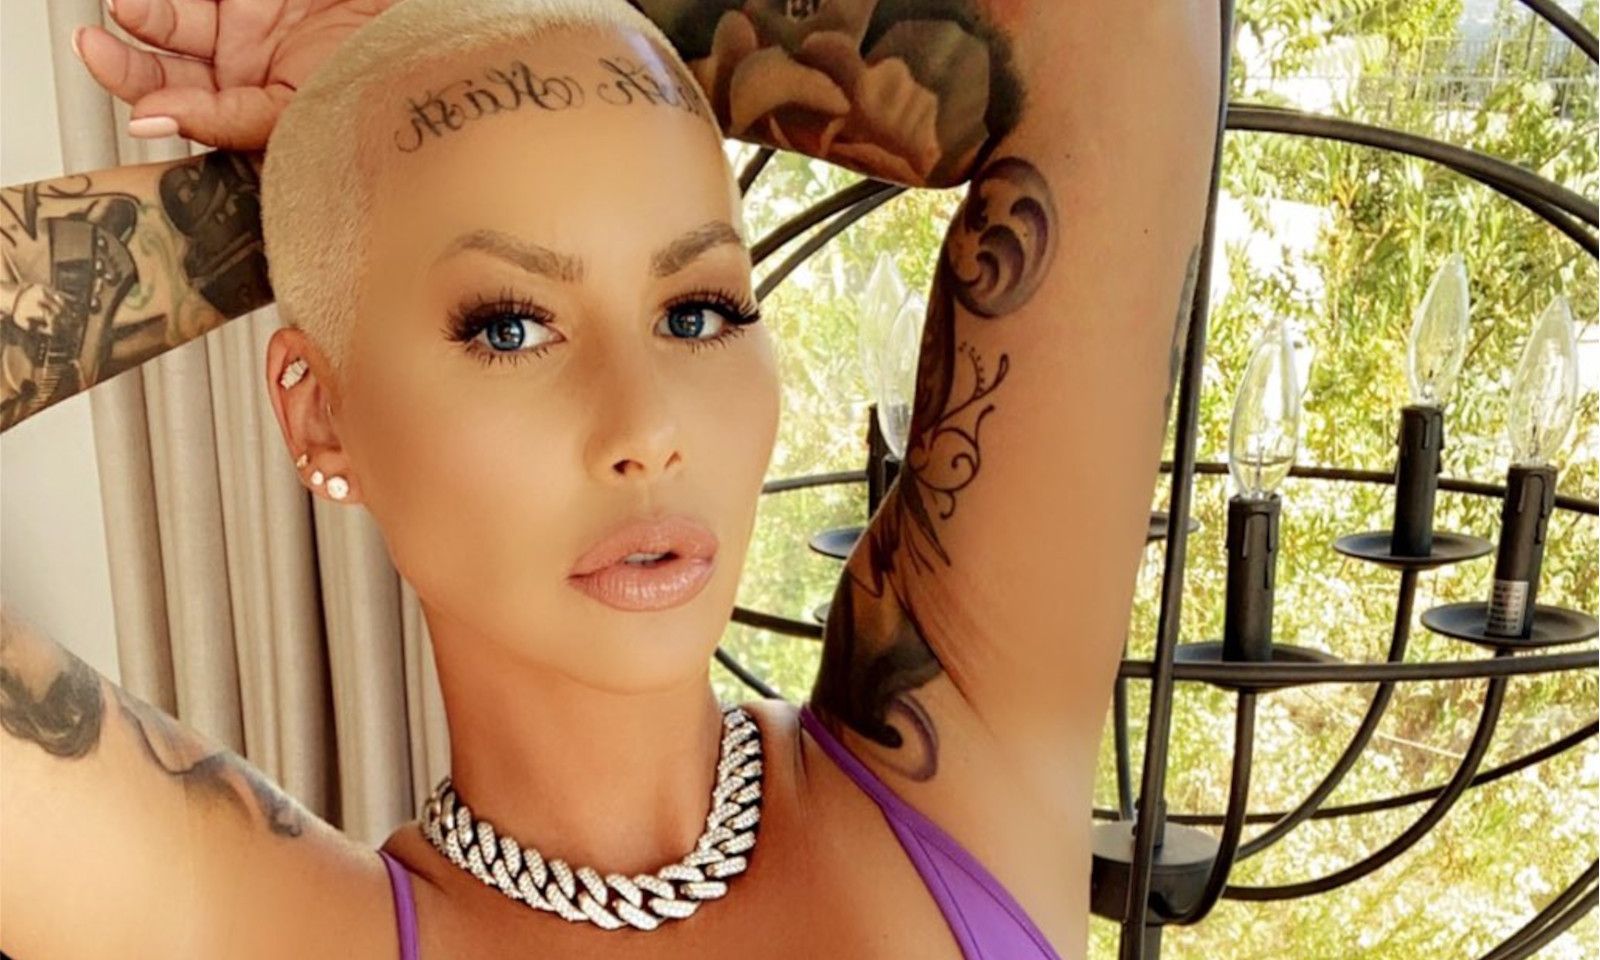 Amber Rose Joins Playboy's Centerfold as a Founding Creator